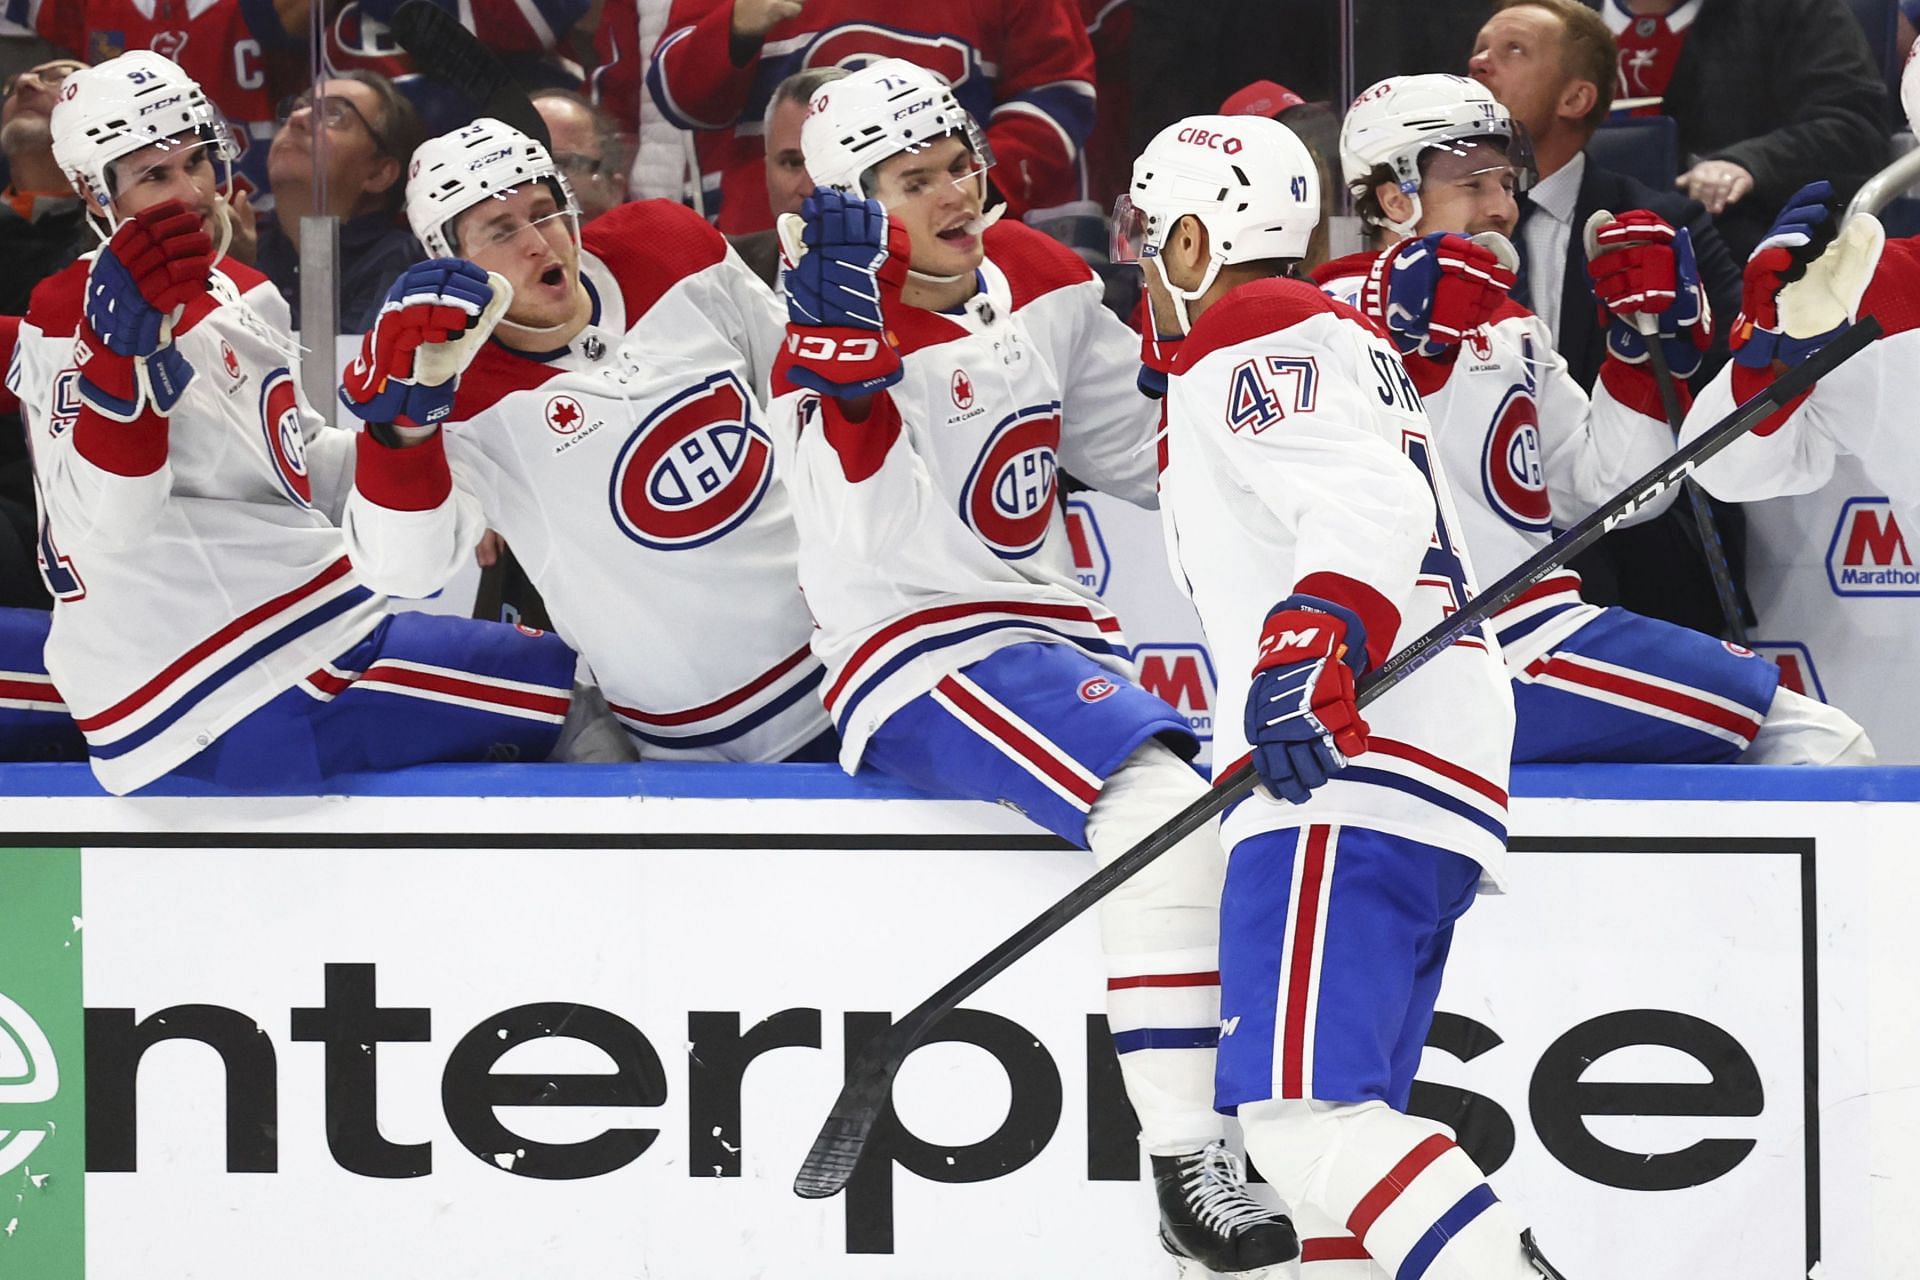 Nashville Predators Vs Montreal Canadiens Game Preview Predictions Odds Betting Tips And More 